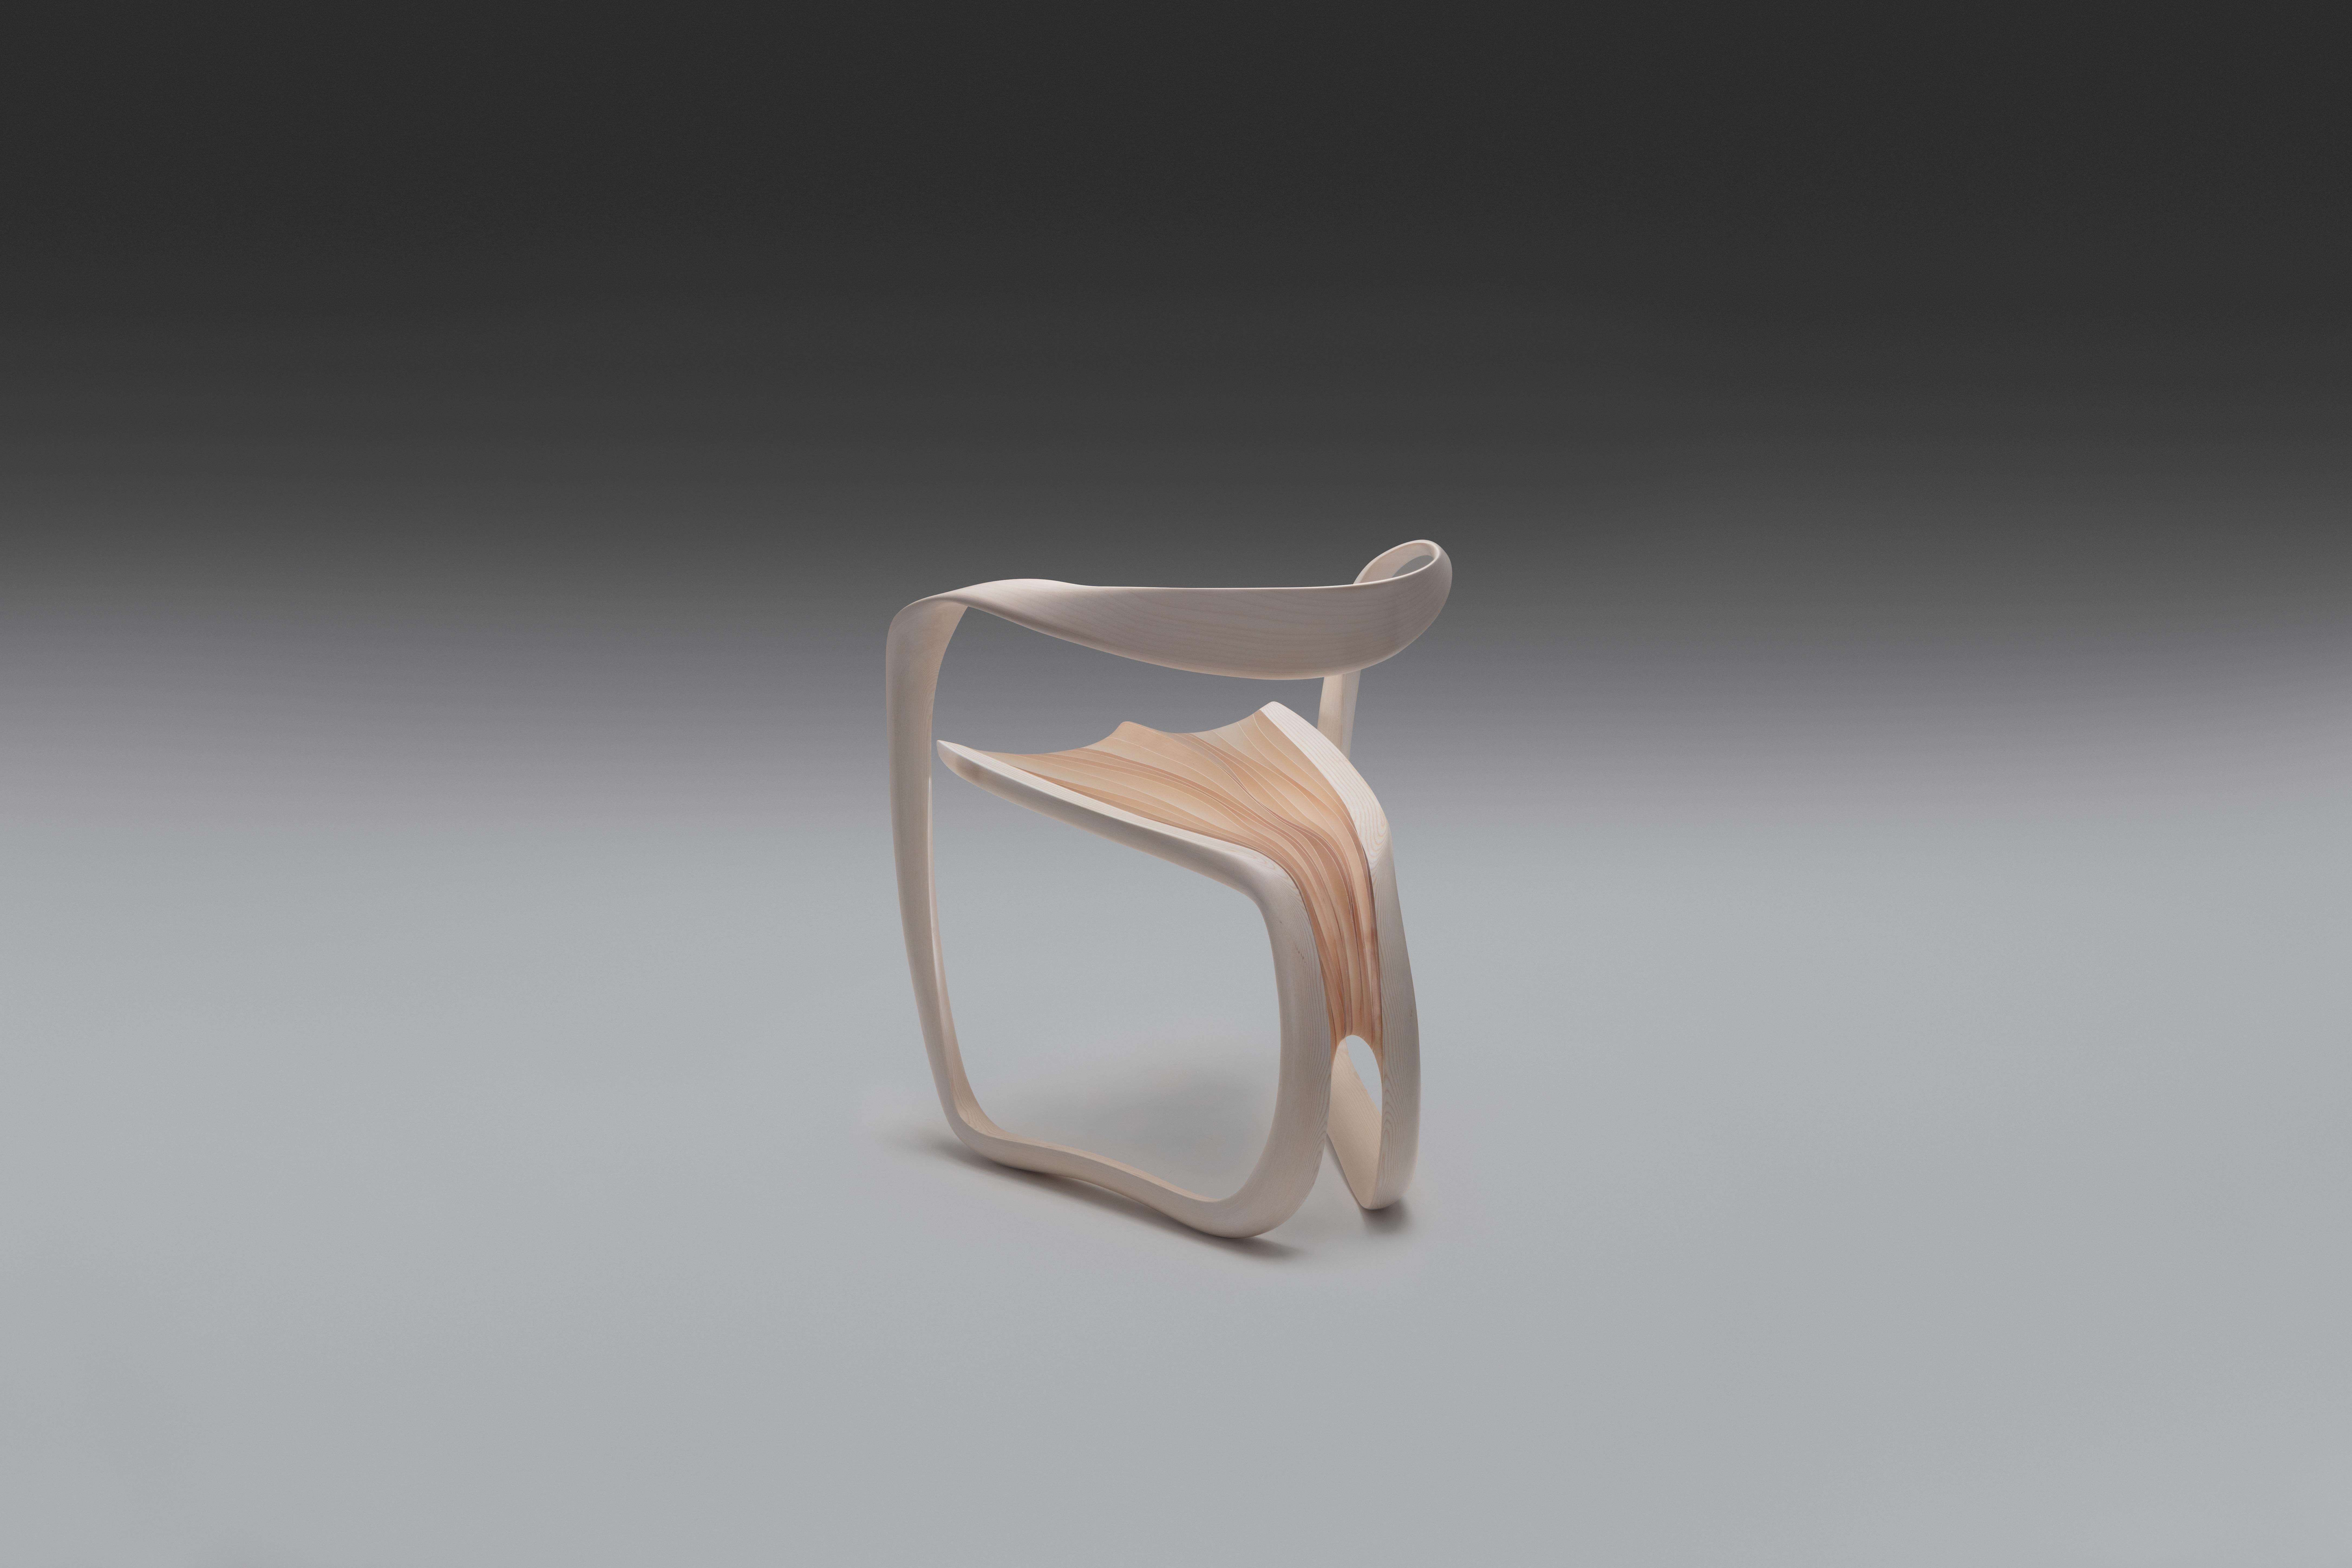 Organic Modern Marc Fish Ethereal Chair Sycamore and Resin Organic Sculptural Design For Sale